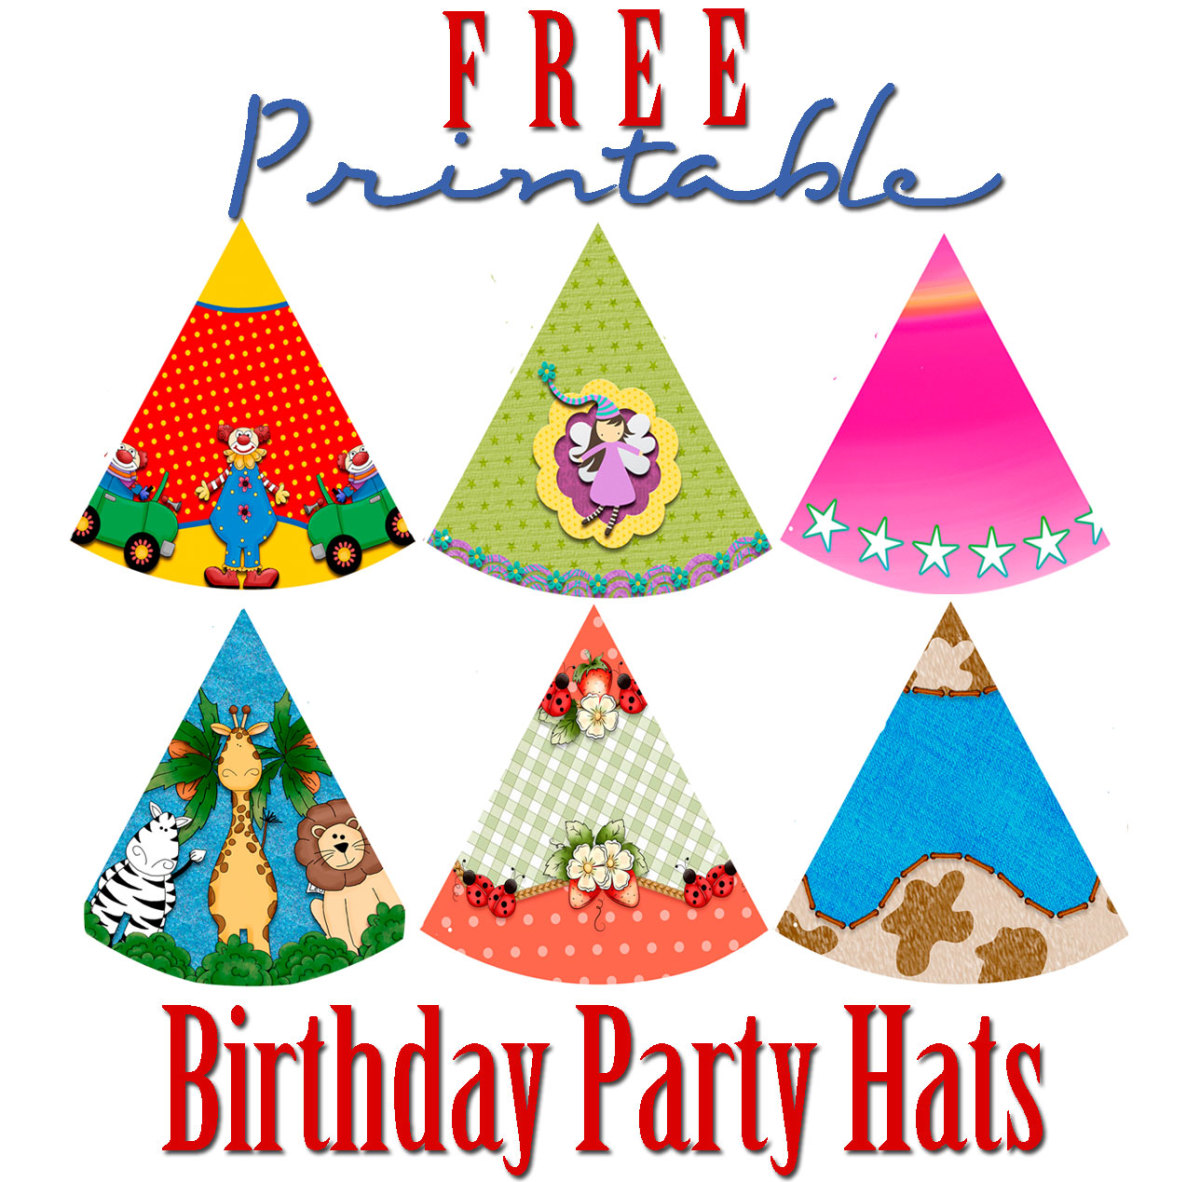 Free Printable Birthday Party Hats Hubpages